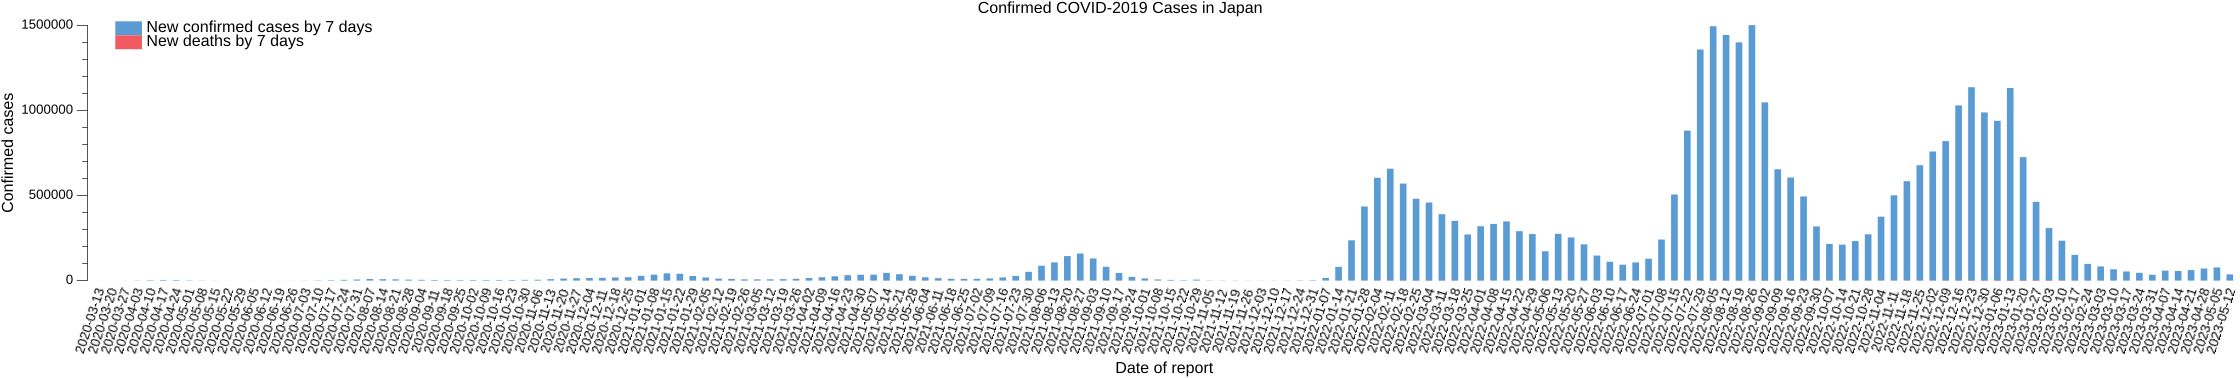 Confirmed COVID-2019 Cases in Japan